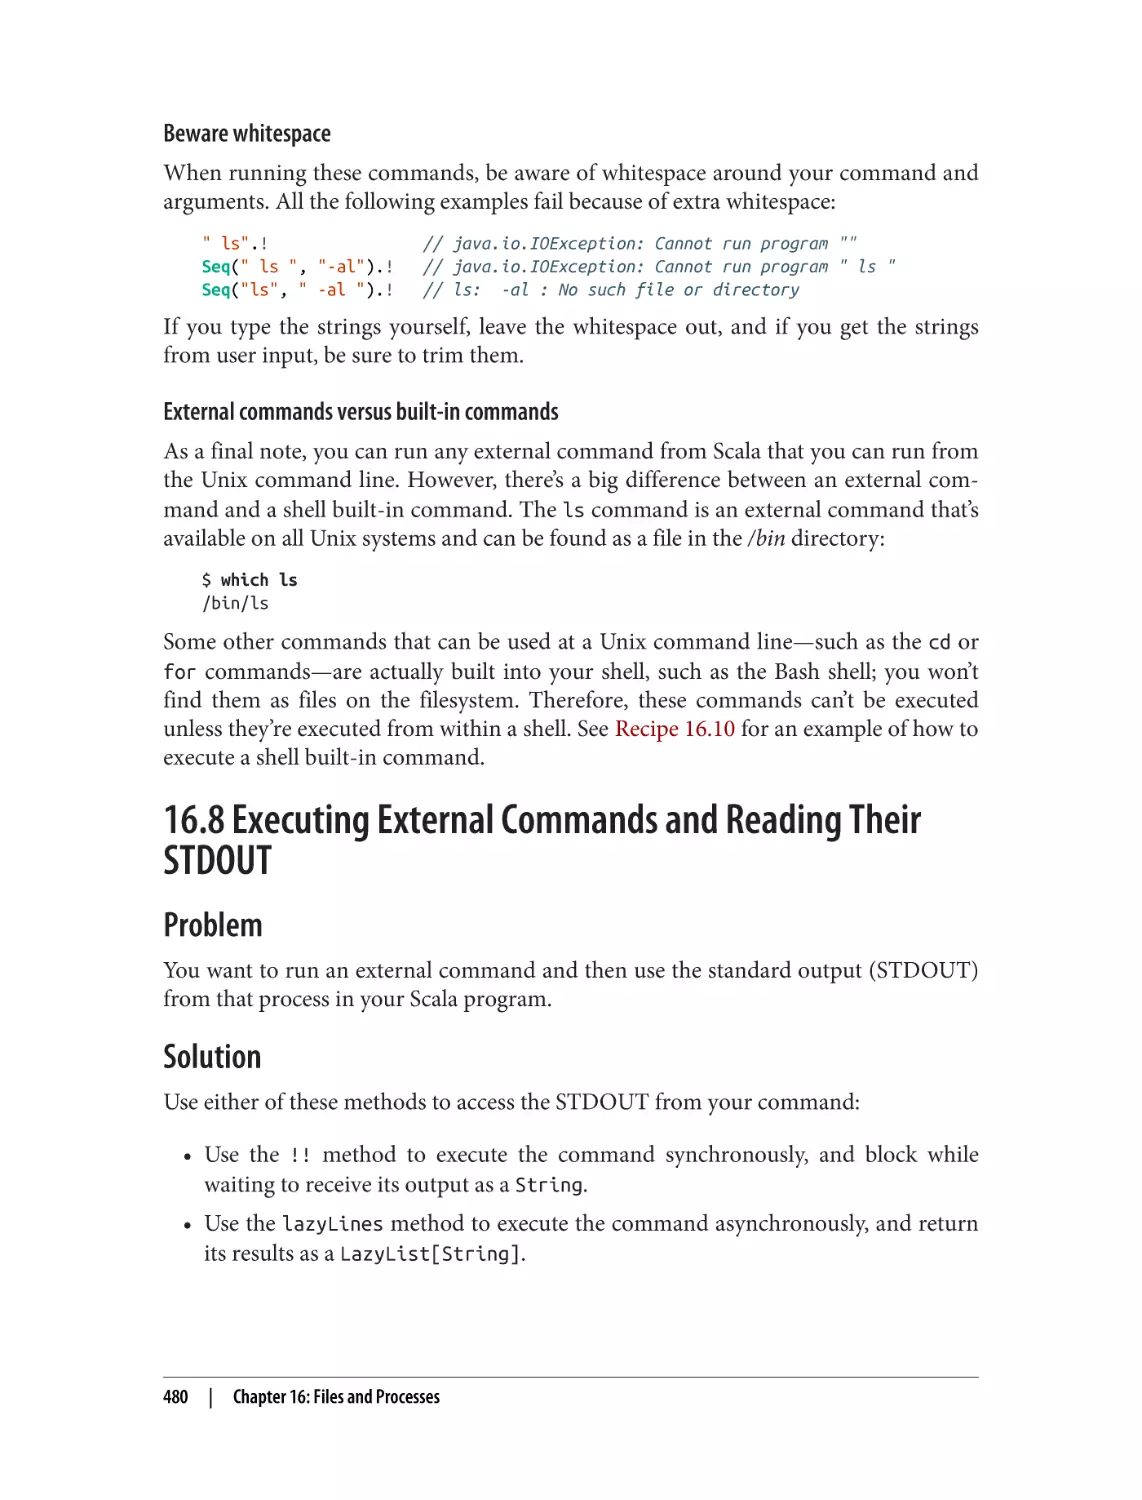 16.8 Executing External Commands and Reading Their STDOUT
Problem
Solution